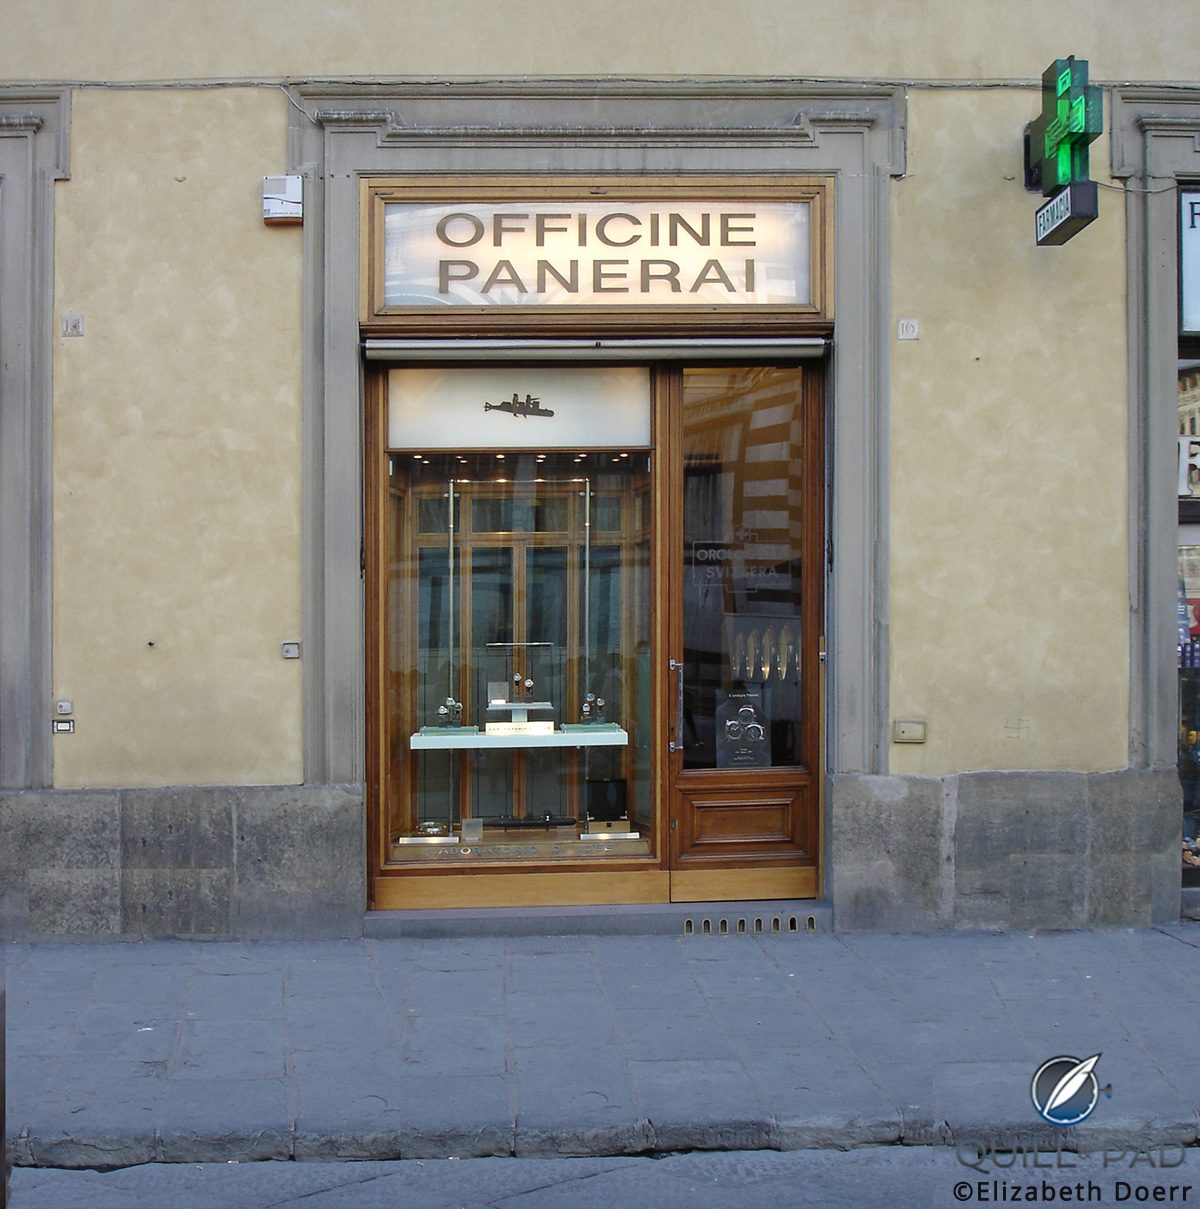 The Officine Panerai boutique in Florence, Italy